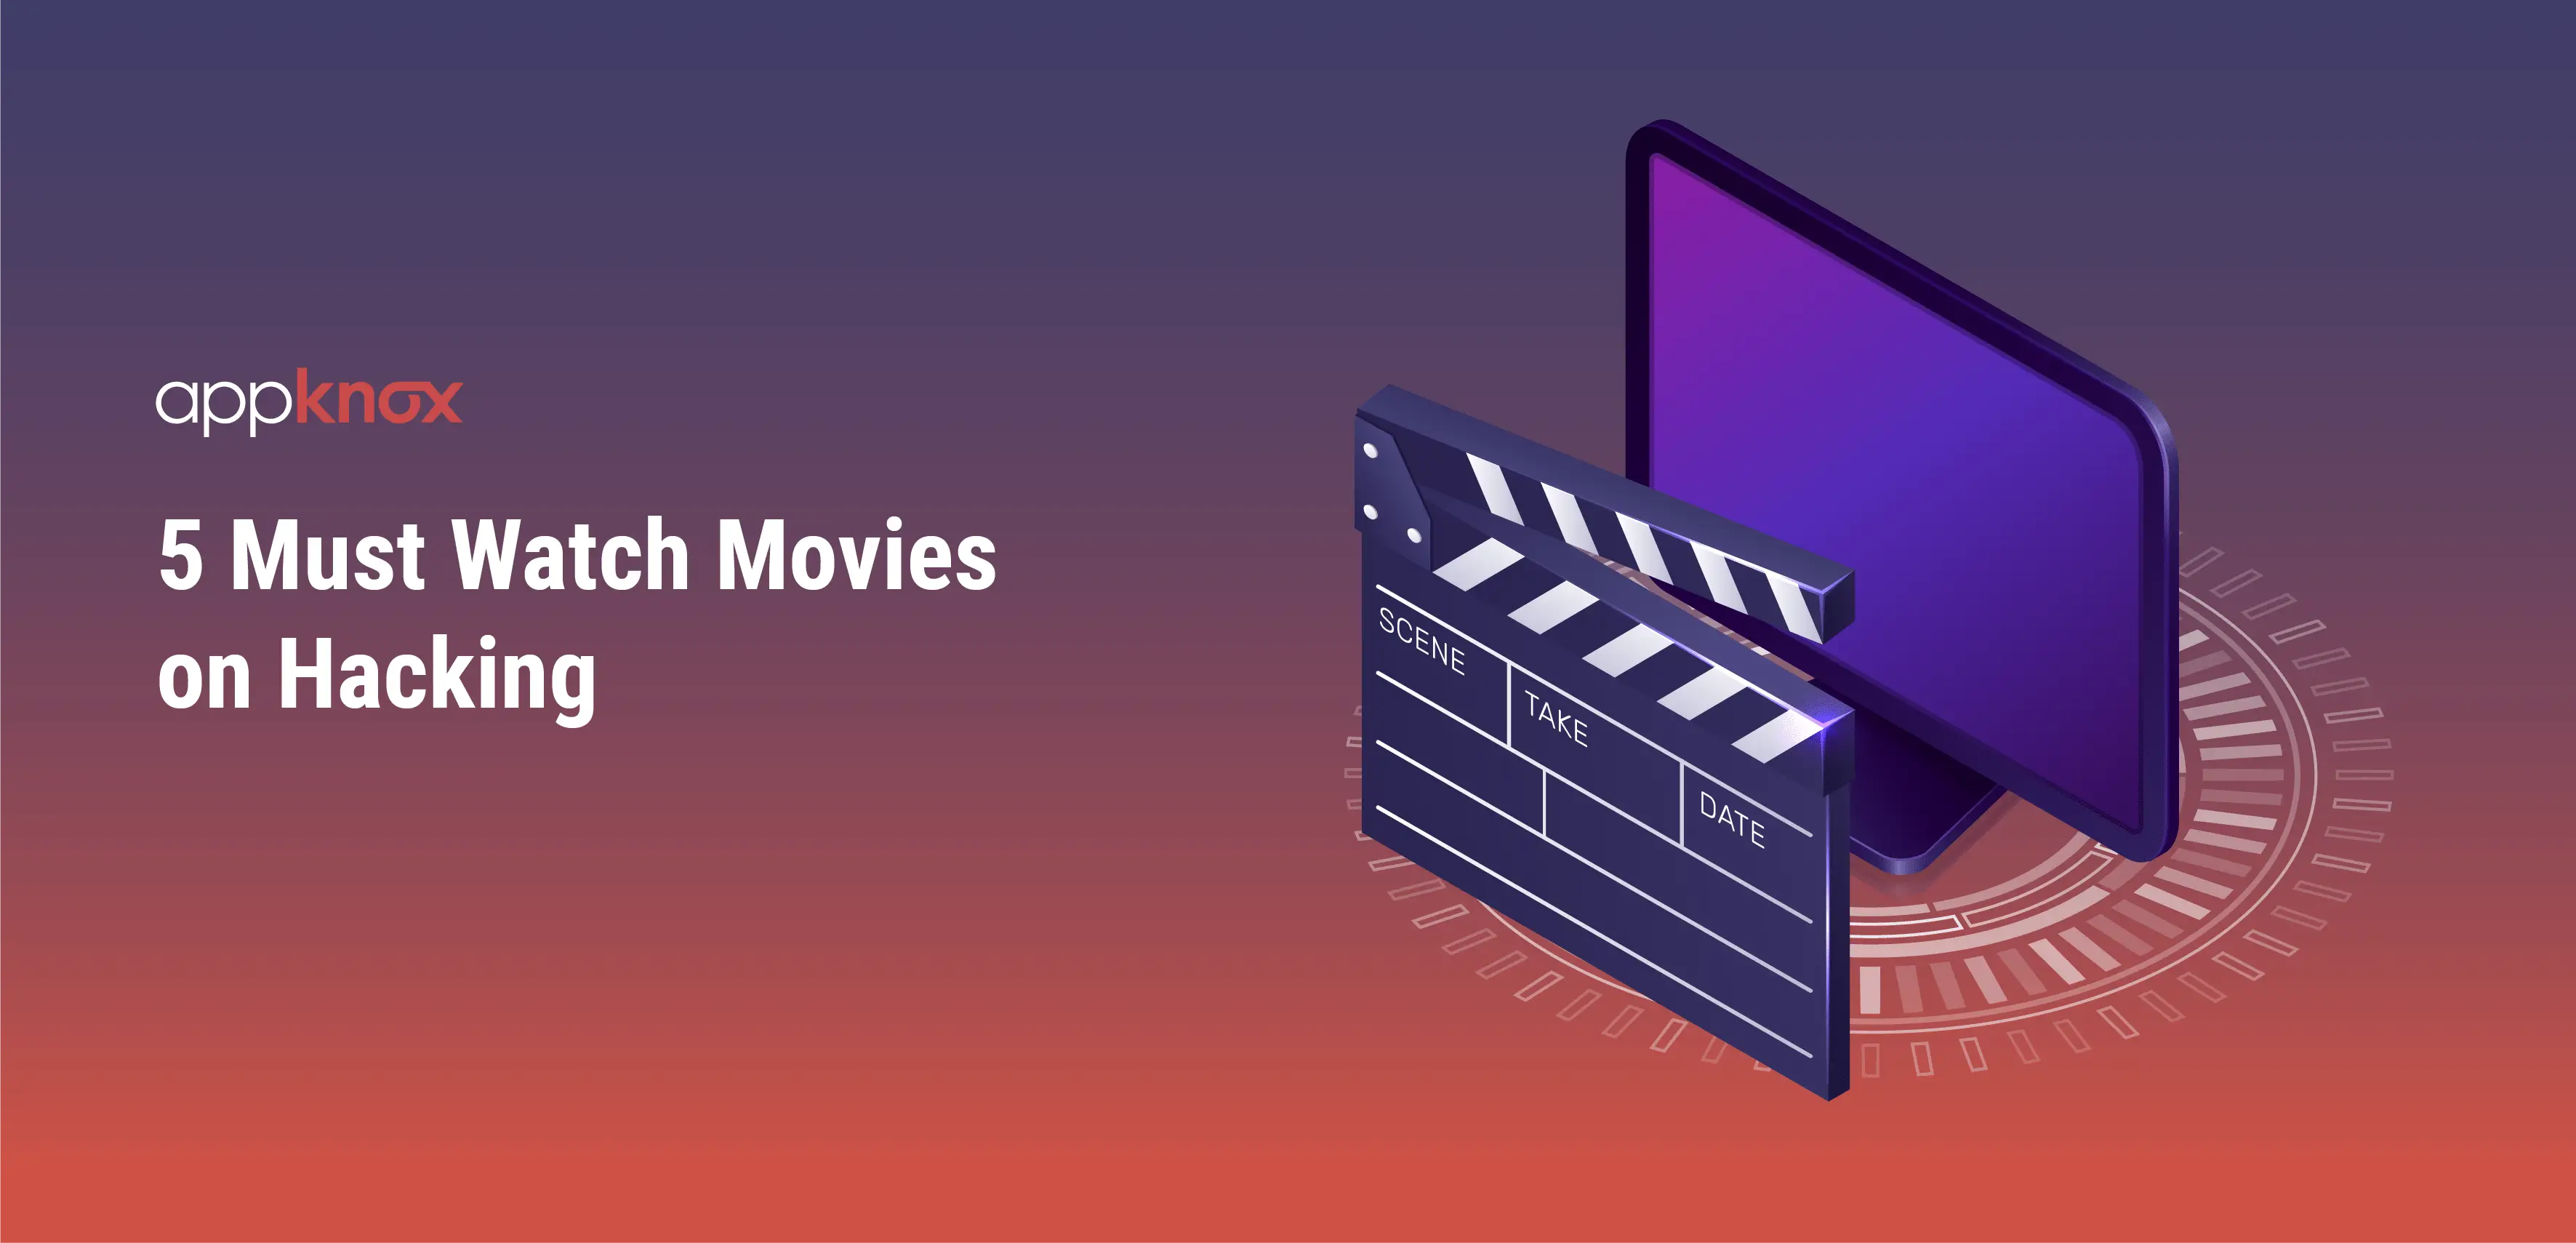 5 Must Watch Movies on Hacking